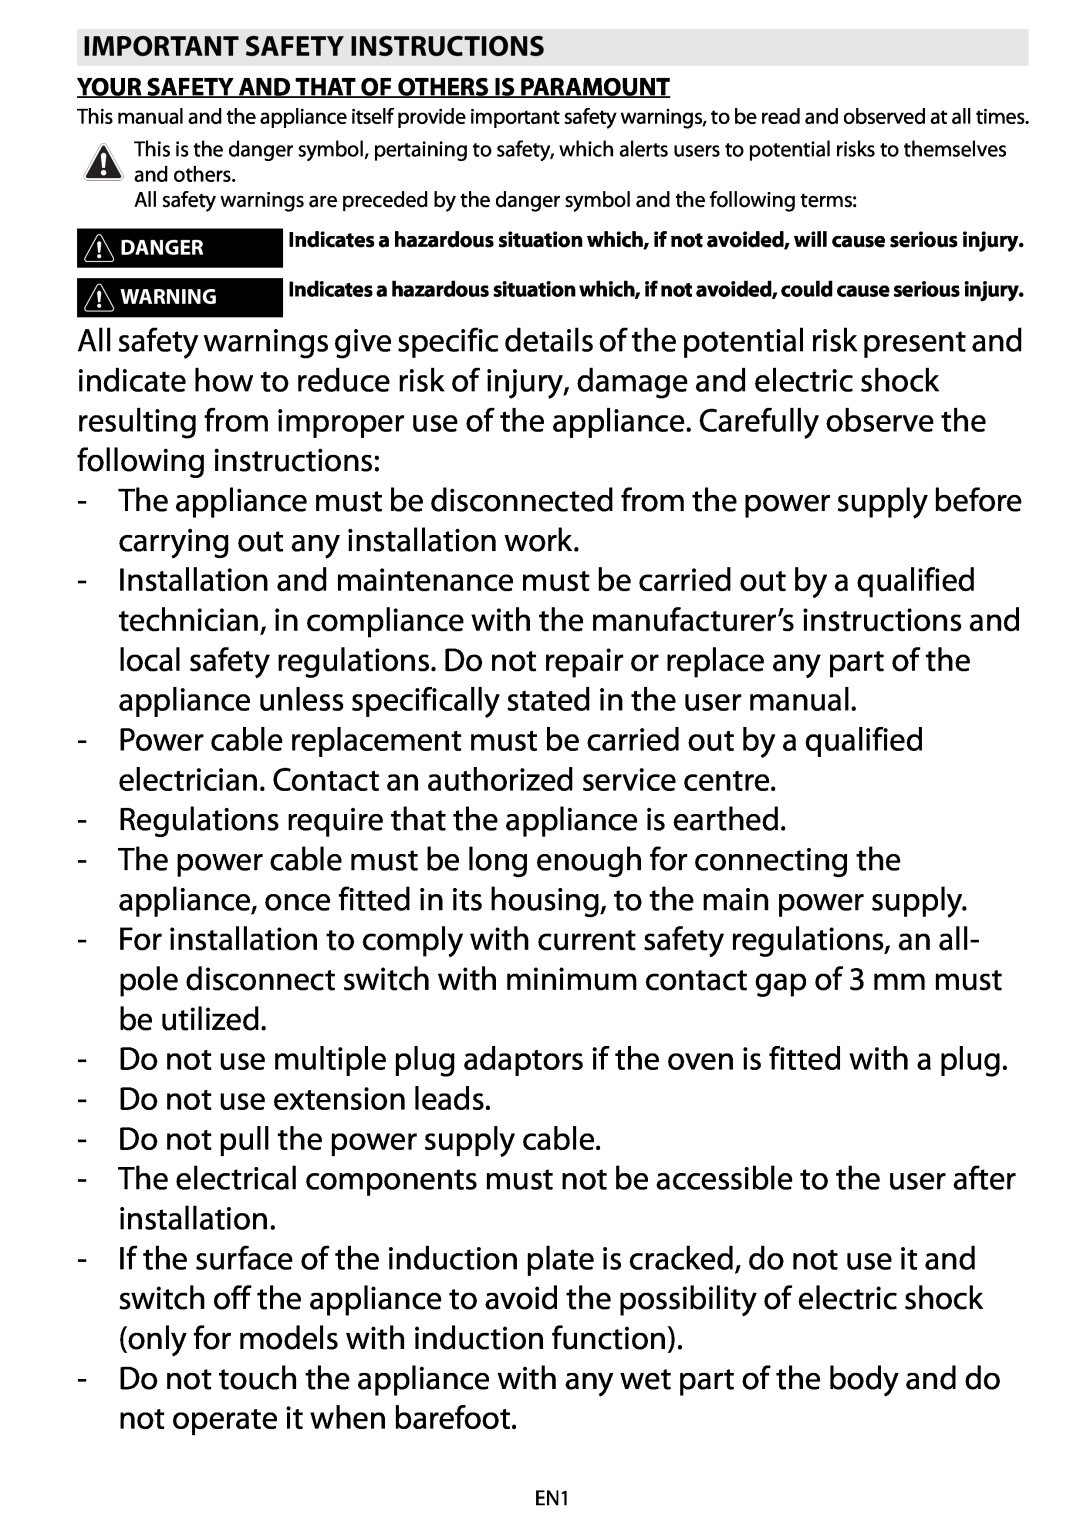 Whirlpool AKZM 778 manuel dutilisation Regulations require that the appliance is earthed 